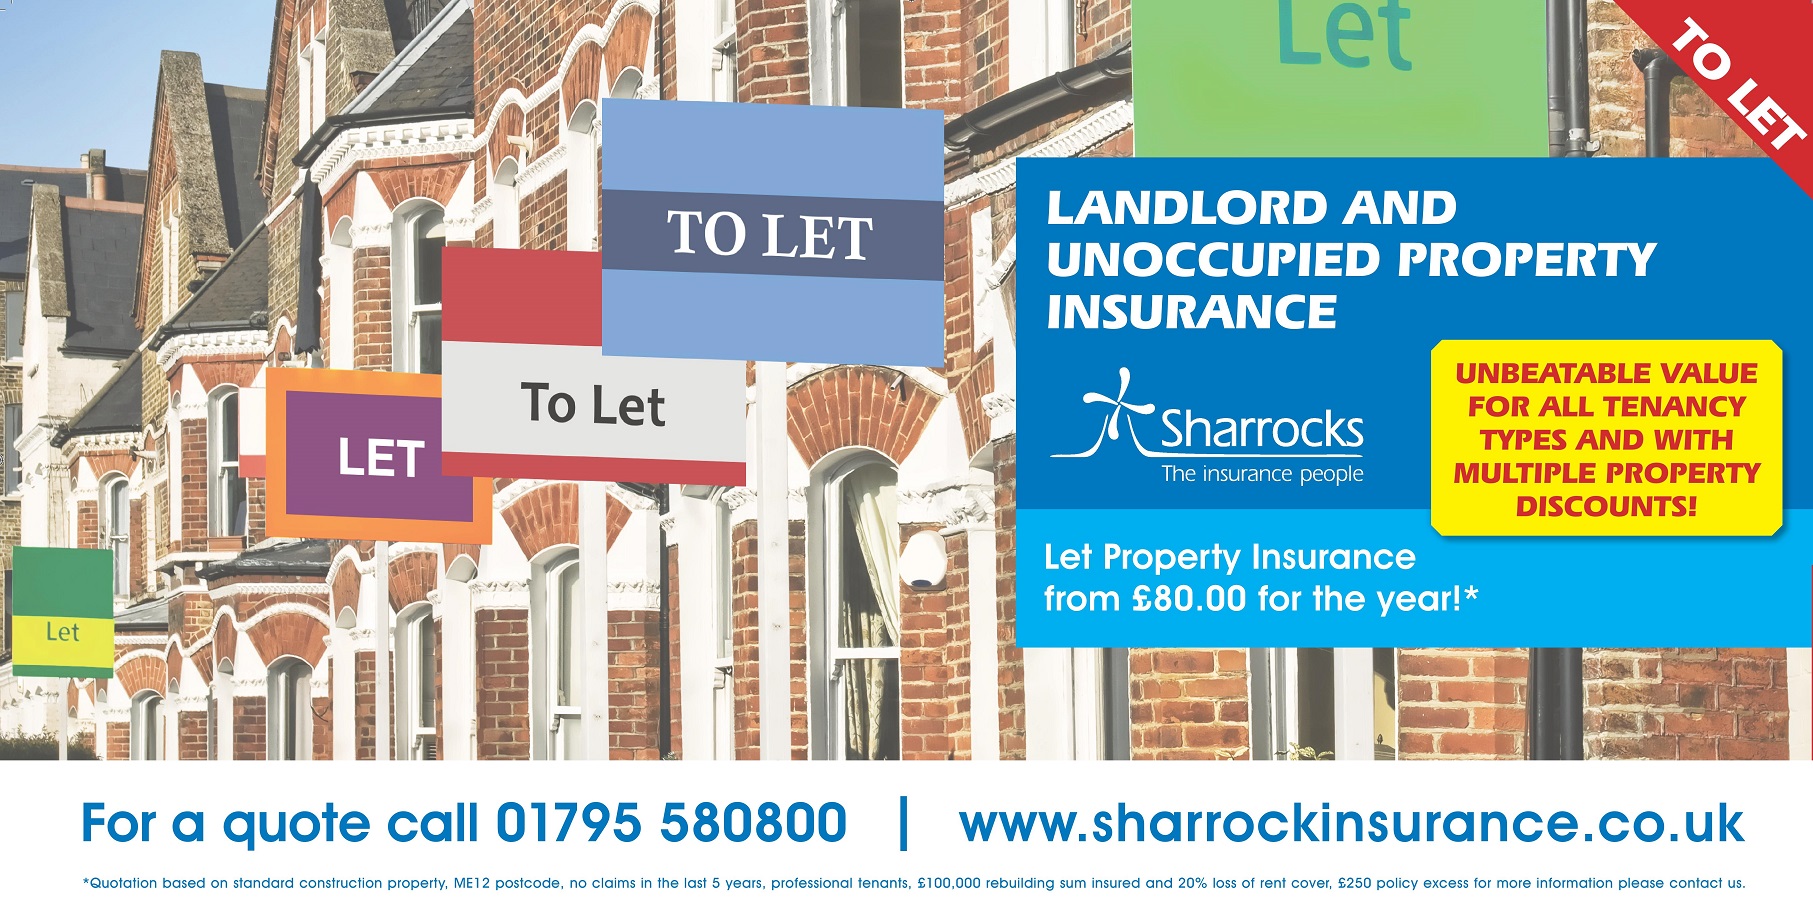 Unoccupied Property Insurance  3 6 or 12 Months  Sharrocks